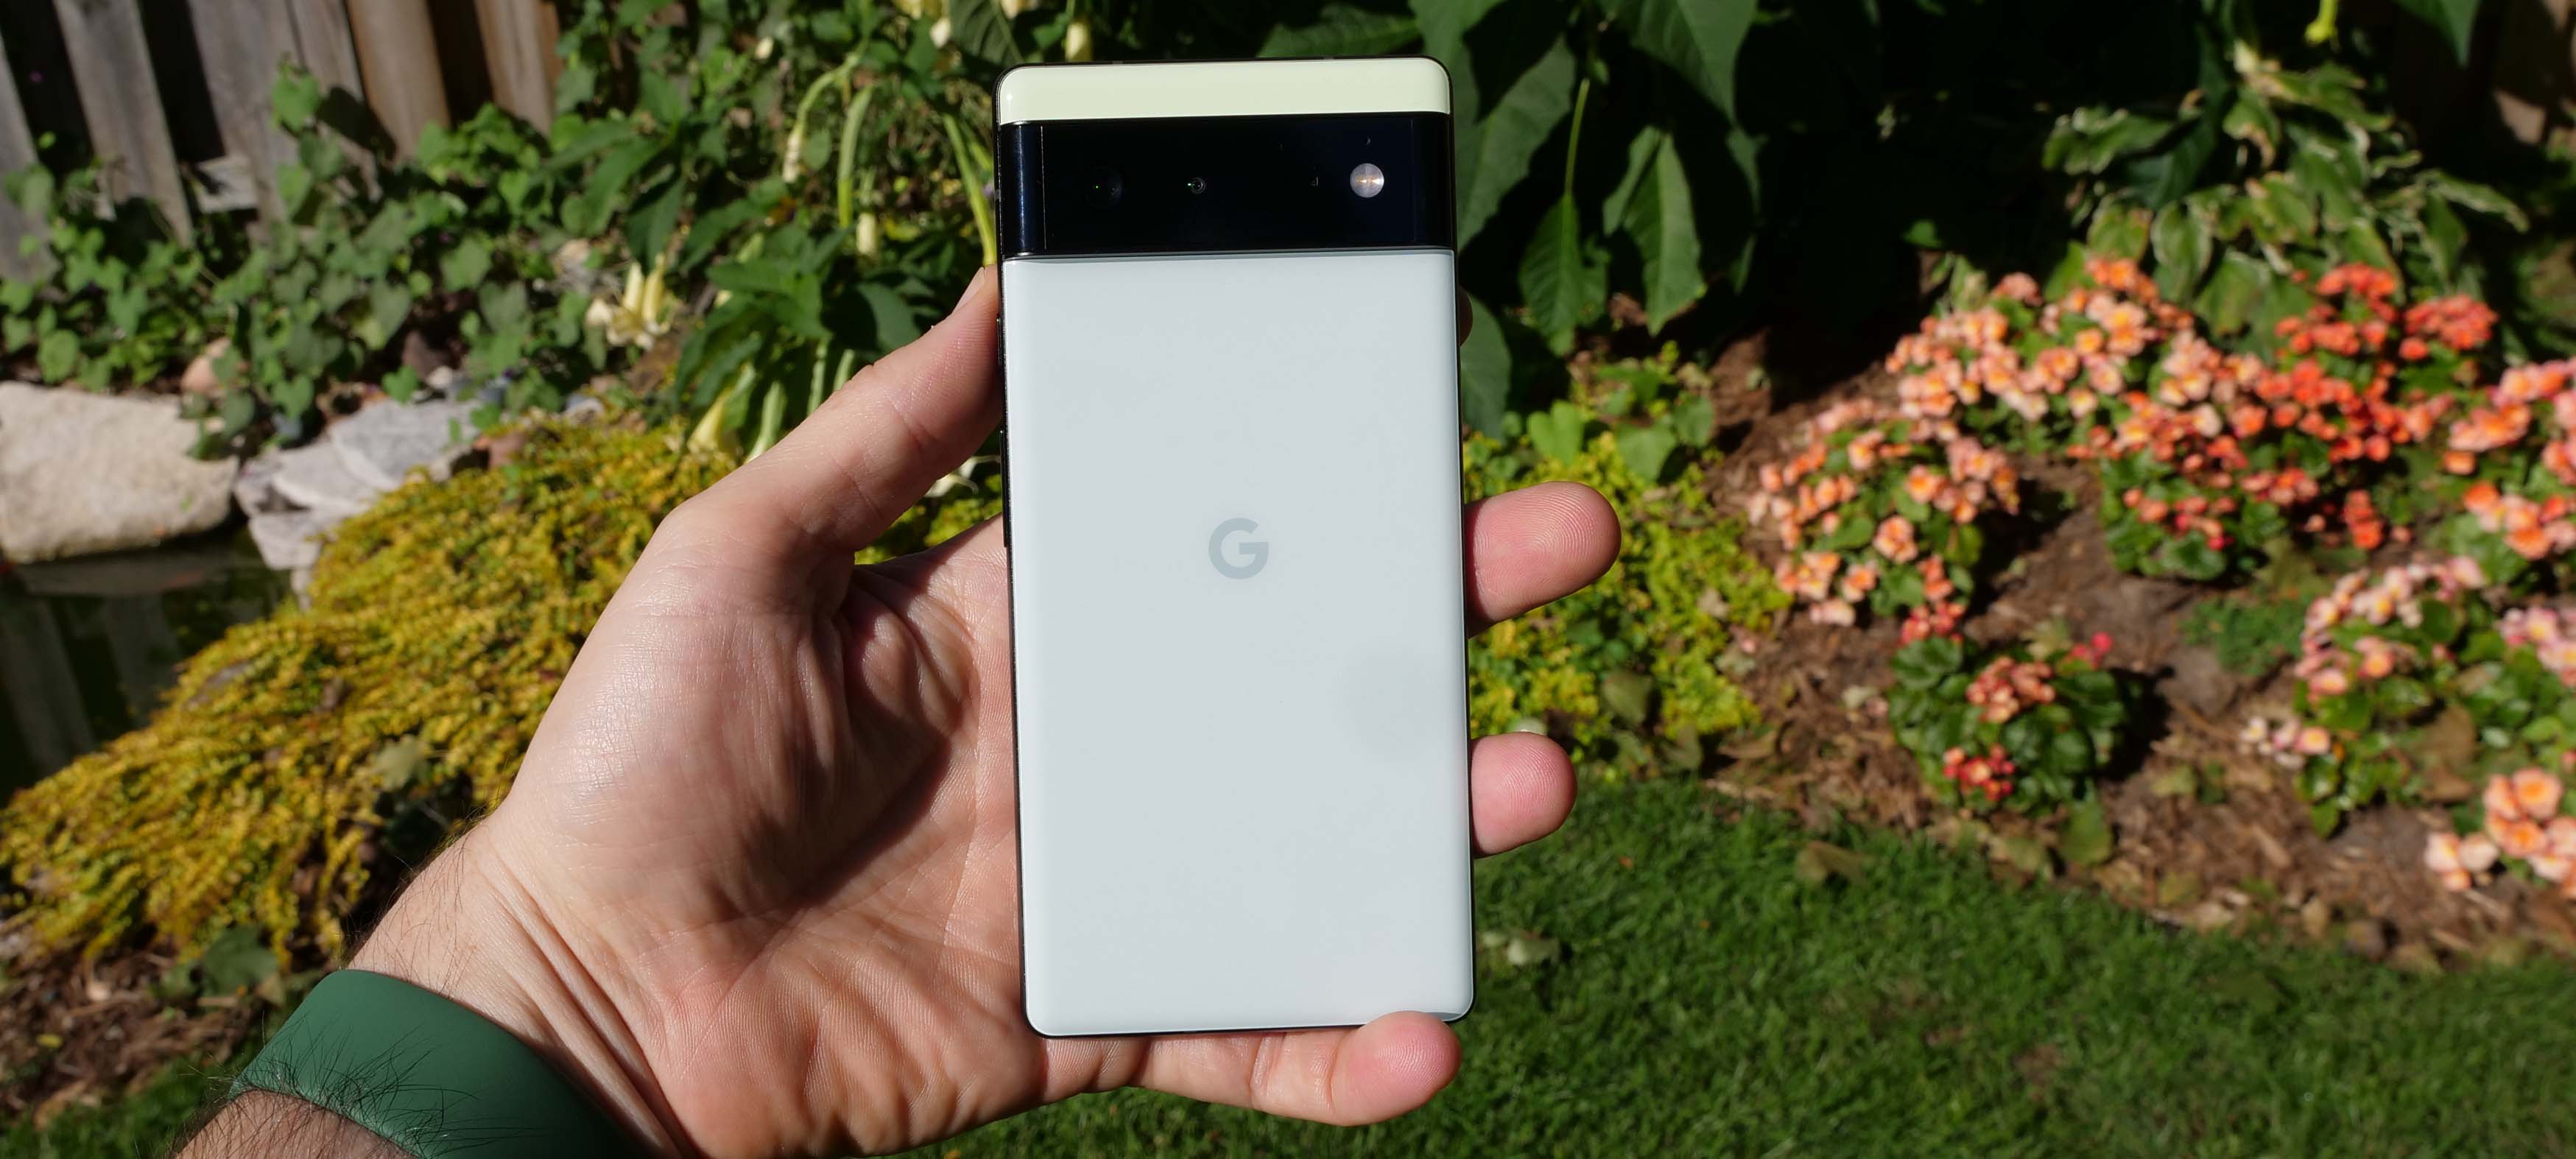 Pixel 6 review: Google Hardware finally lives up to its potential